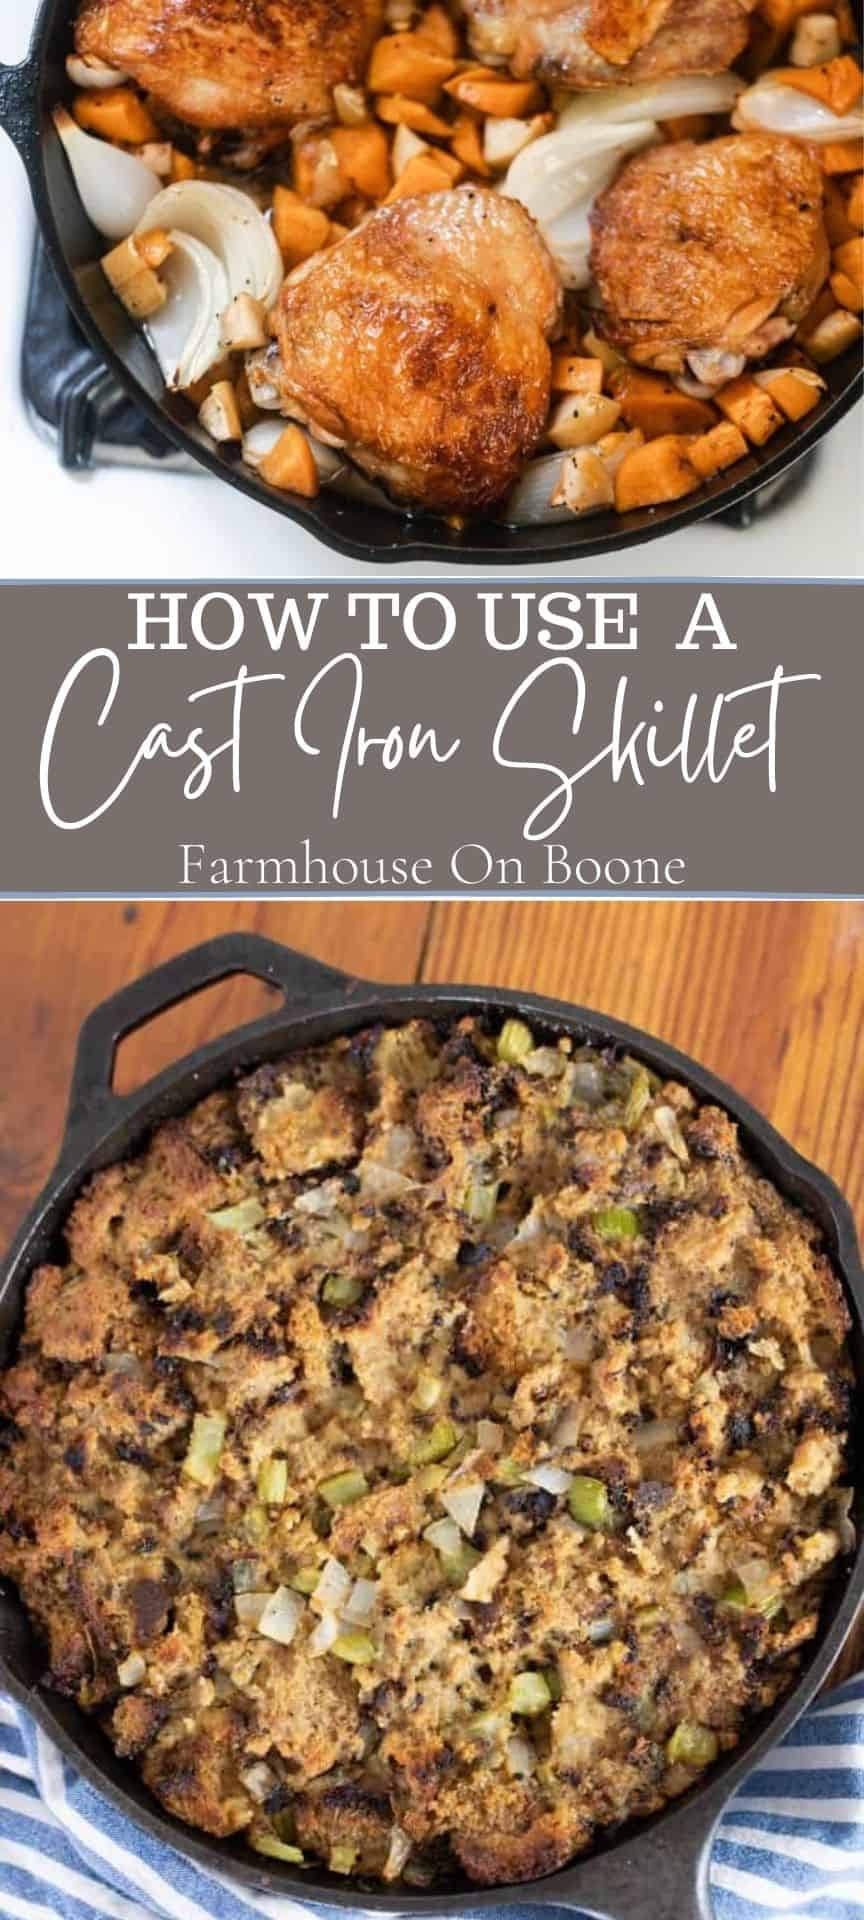 https://www.farmhouseonboone.com/wp-content/uploads/2018/01/how-to-use-a-cast-iron-skillet-4.jpg